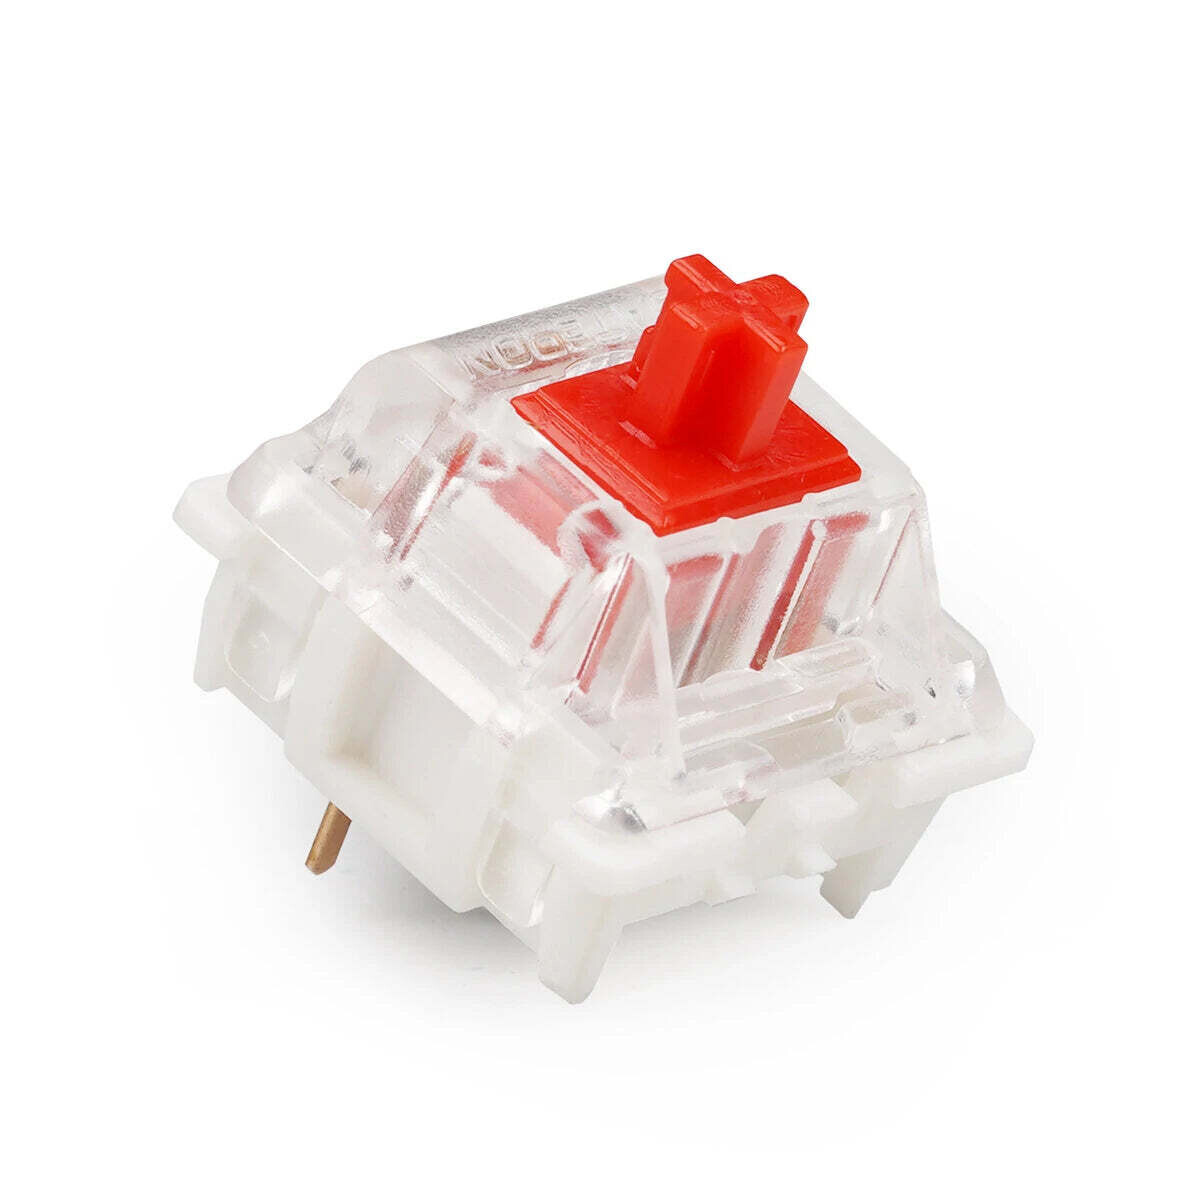 REDOX Key Switch Pack Gateron Silent Red (PCB Mount) (One Hand)